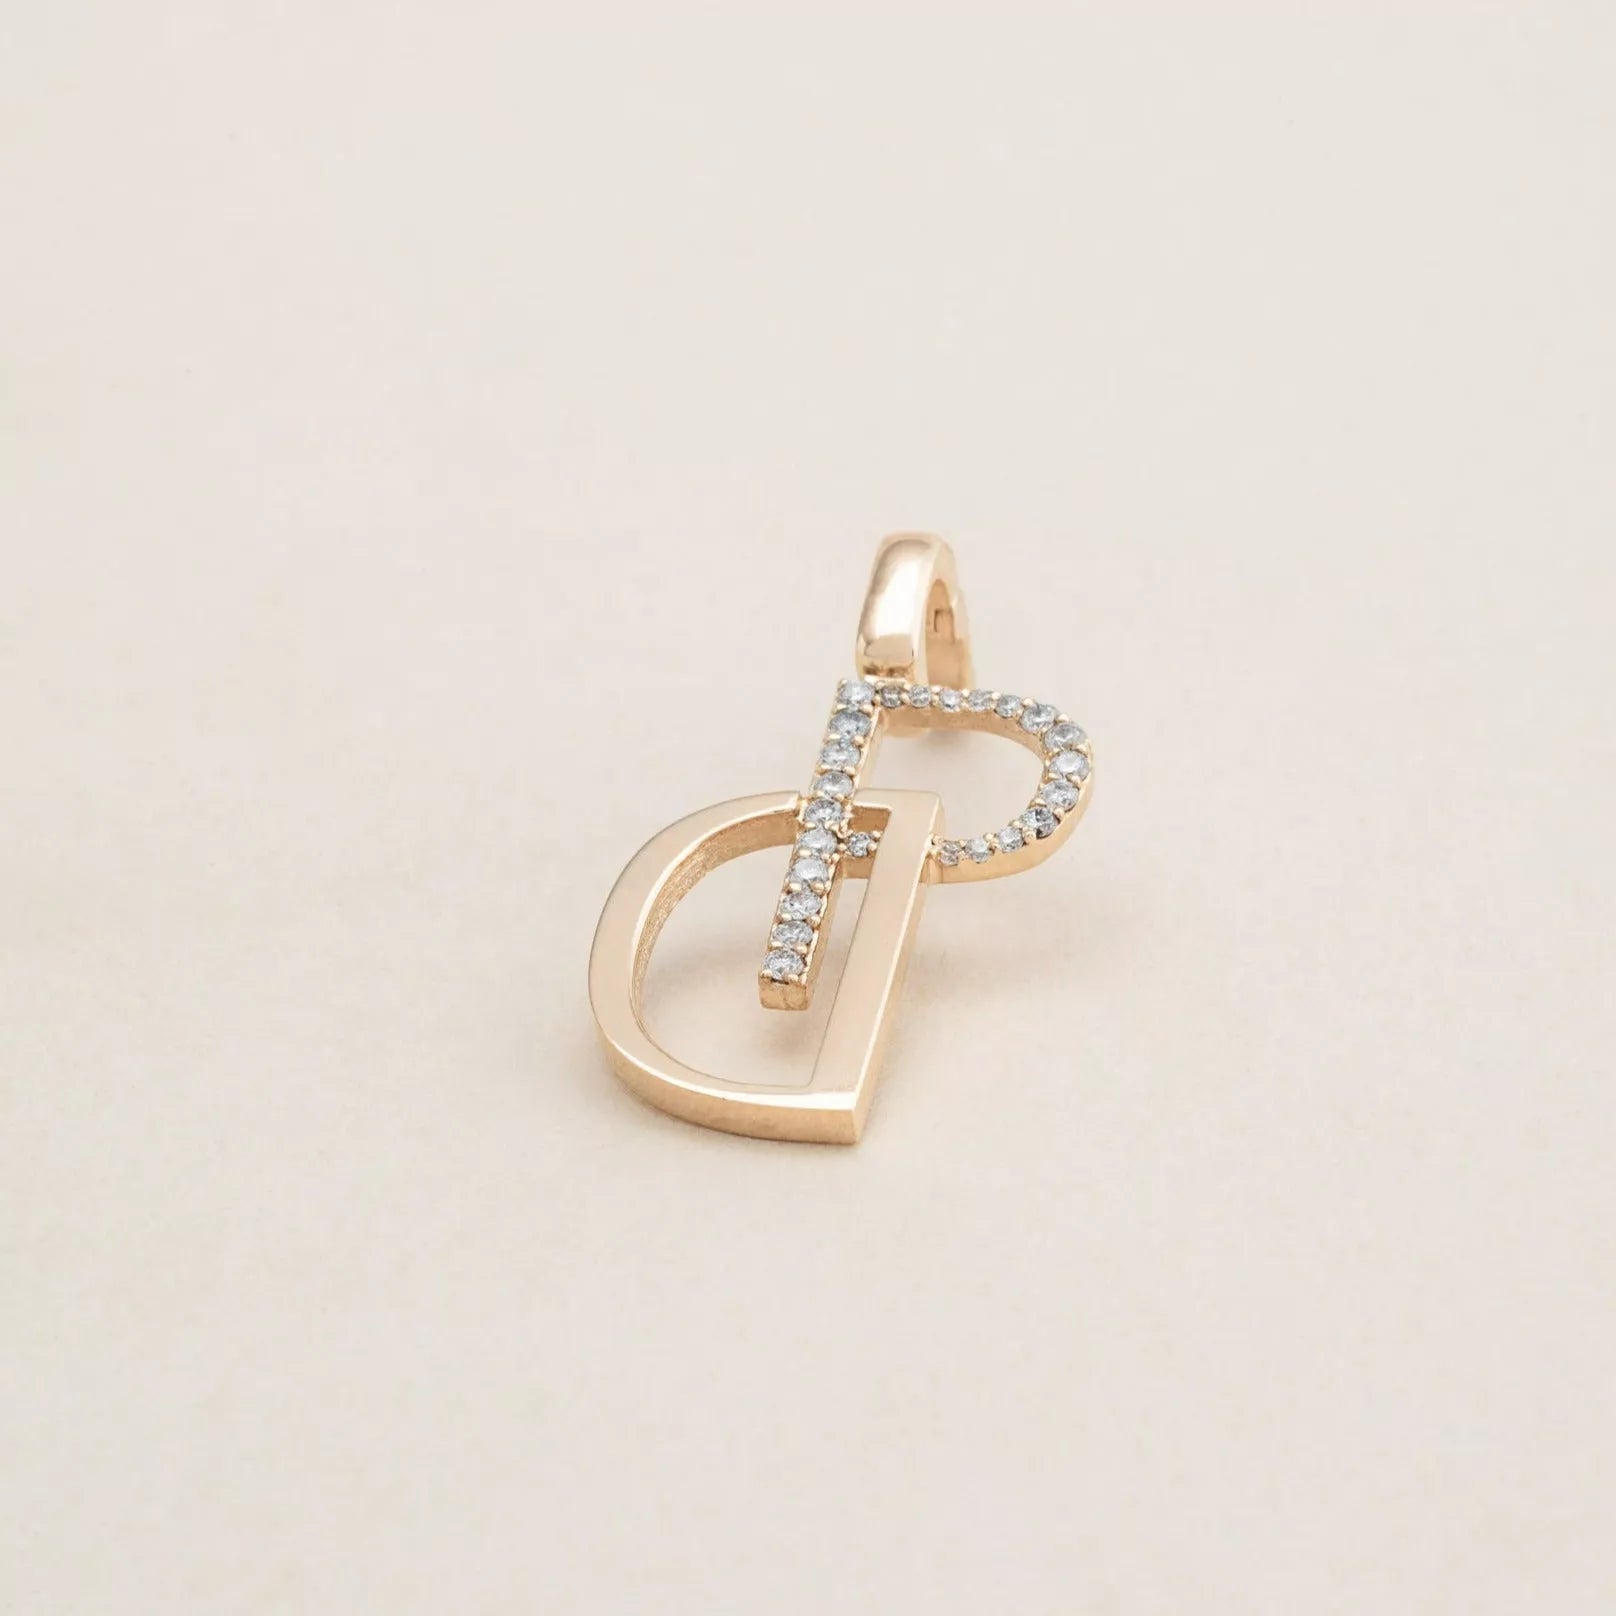 The Signature Charm. 14K Recycle Solid Gold.